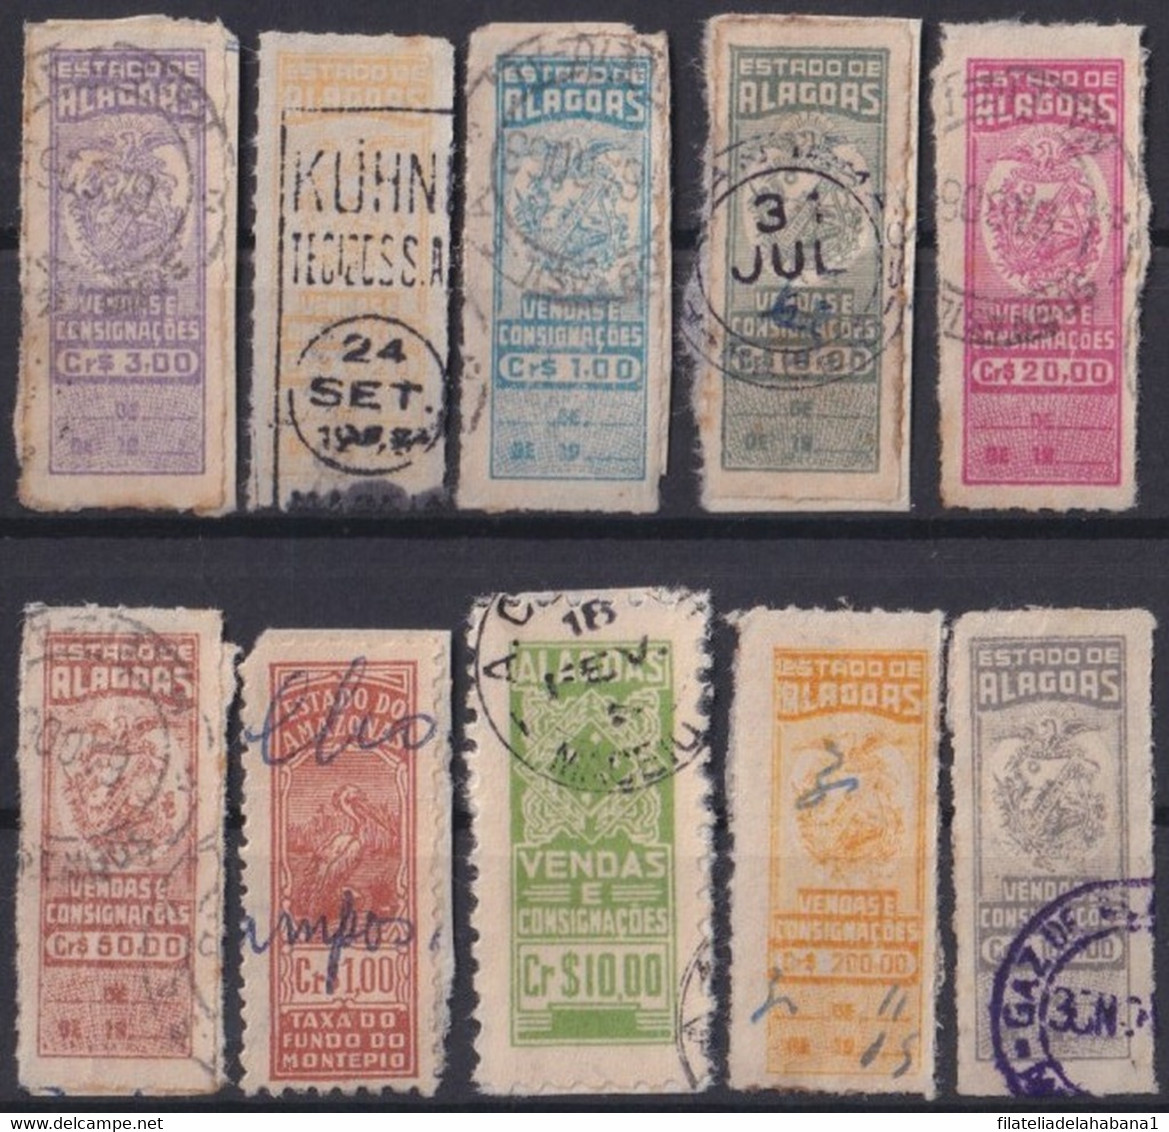 F-EX29493 BRAZIL BRASIL FEDERAL LOCAL REVENUE STAMPS LOT. ALAGOAS. - Postage Due